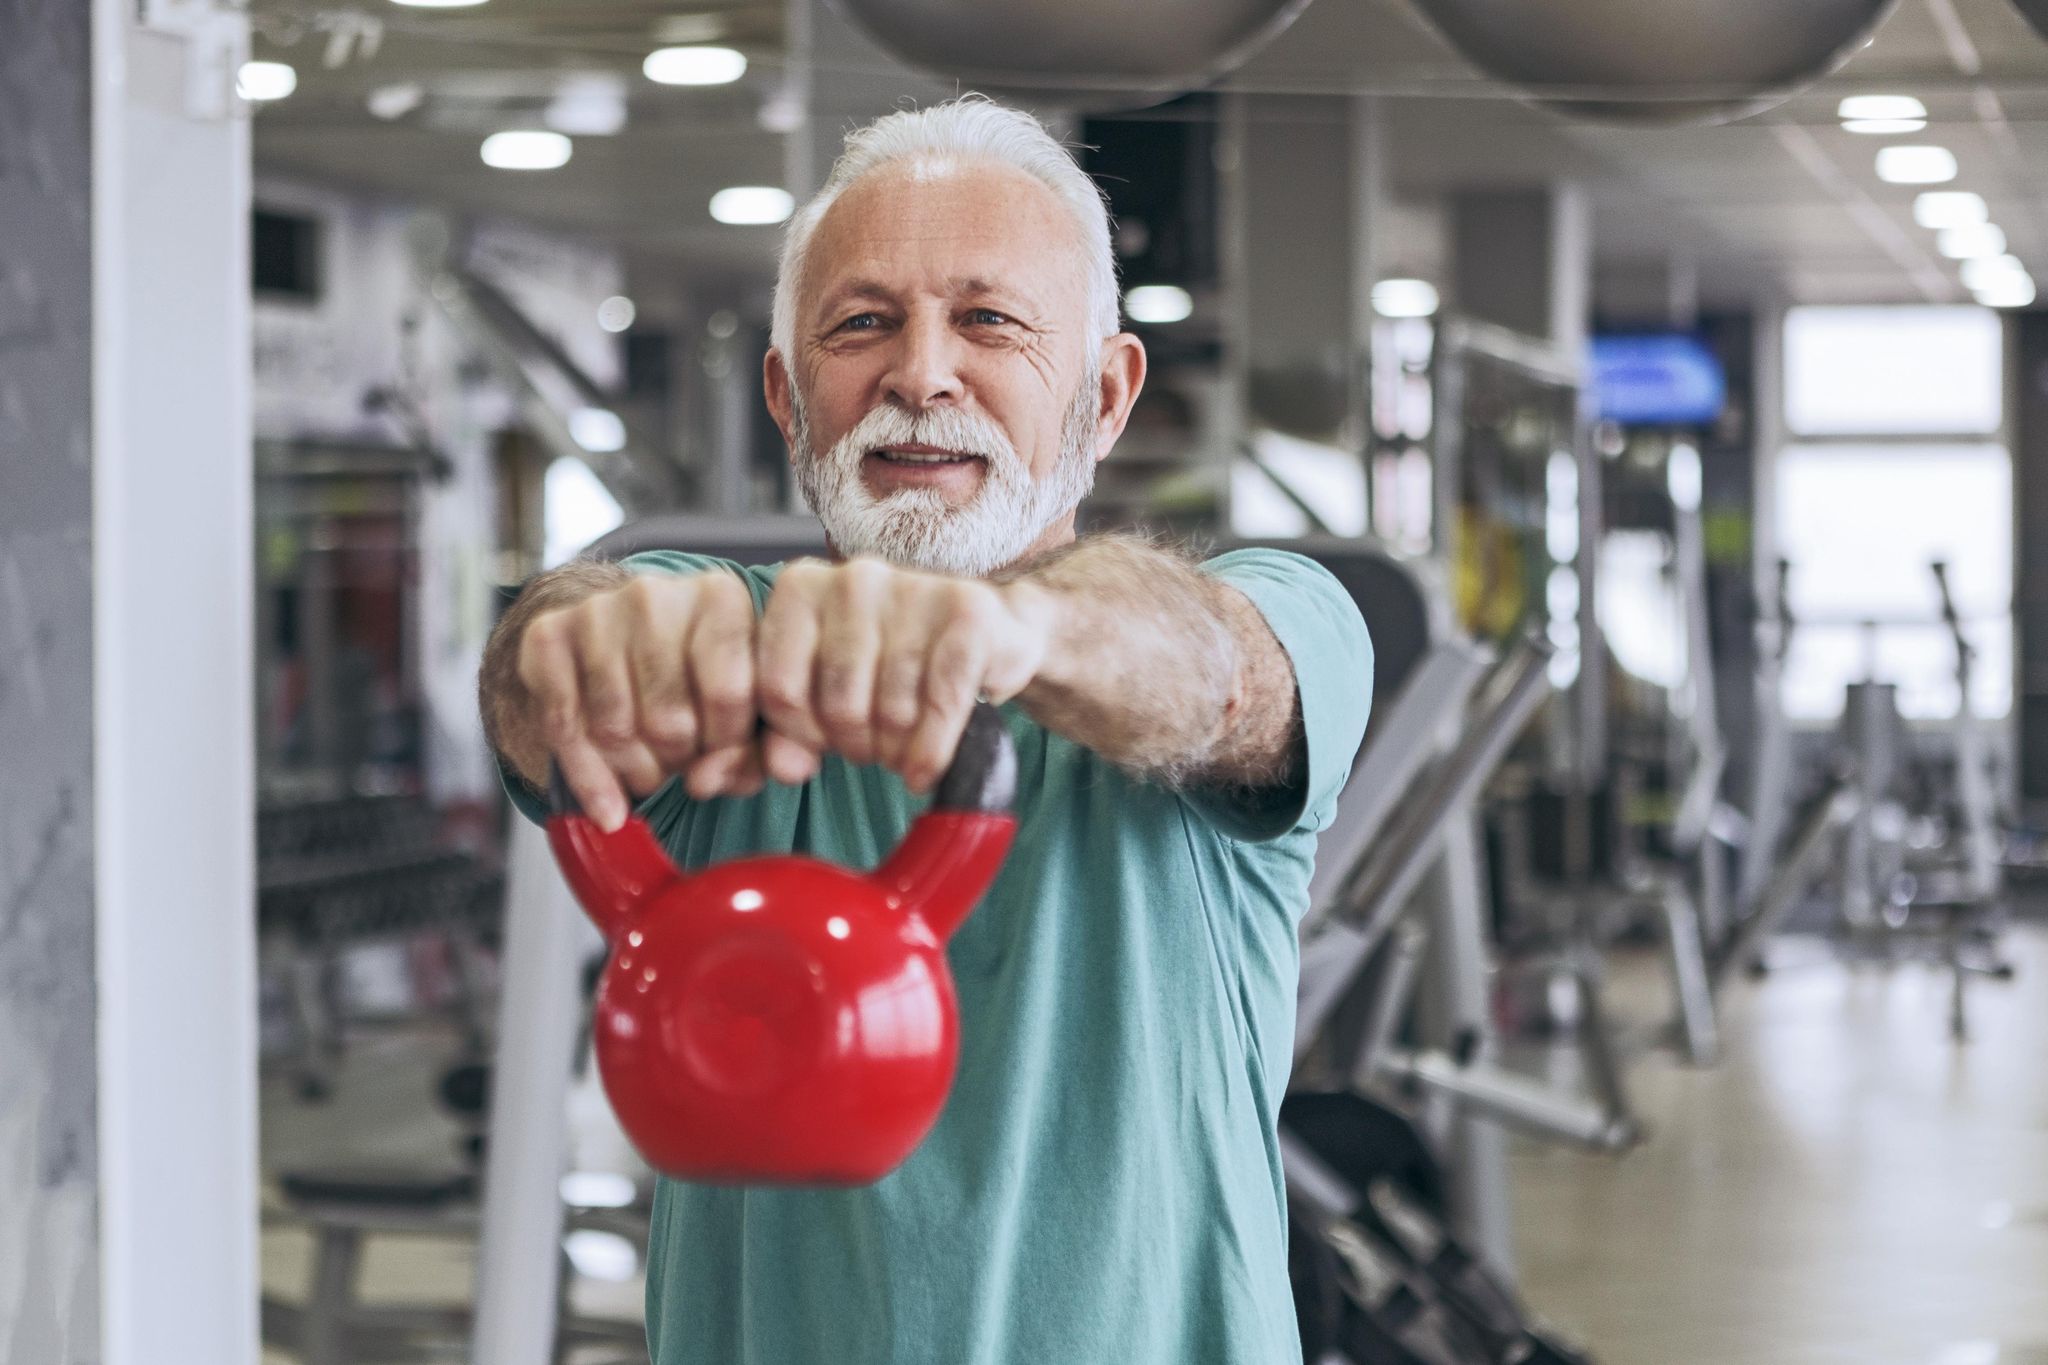 senior man in gym working out using kettle bells